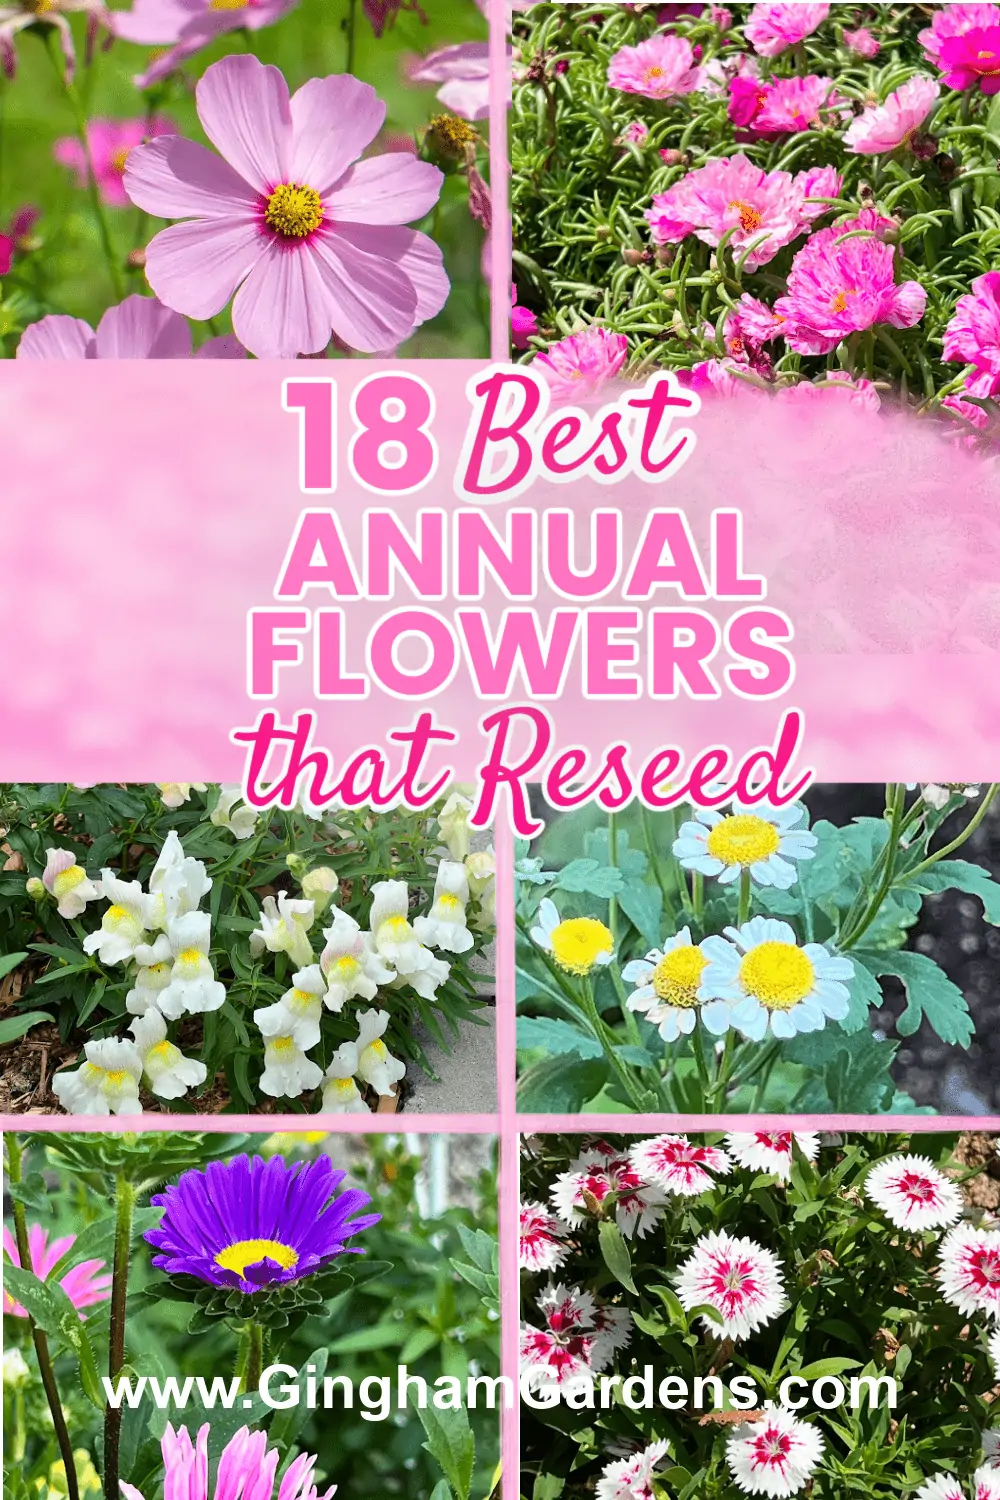 Images of pretty flowers with text overlay - 18 Best Annual Flowers that Reseed